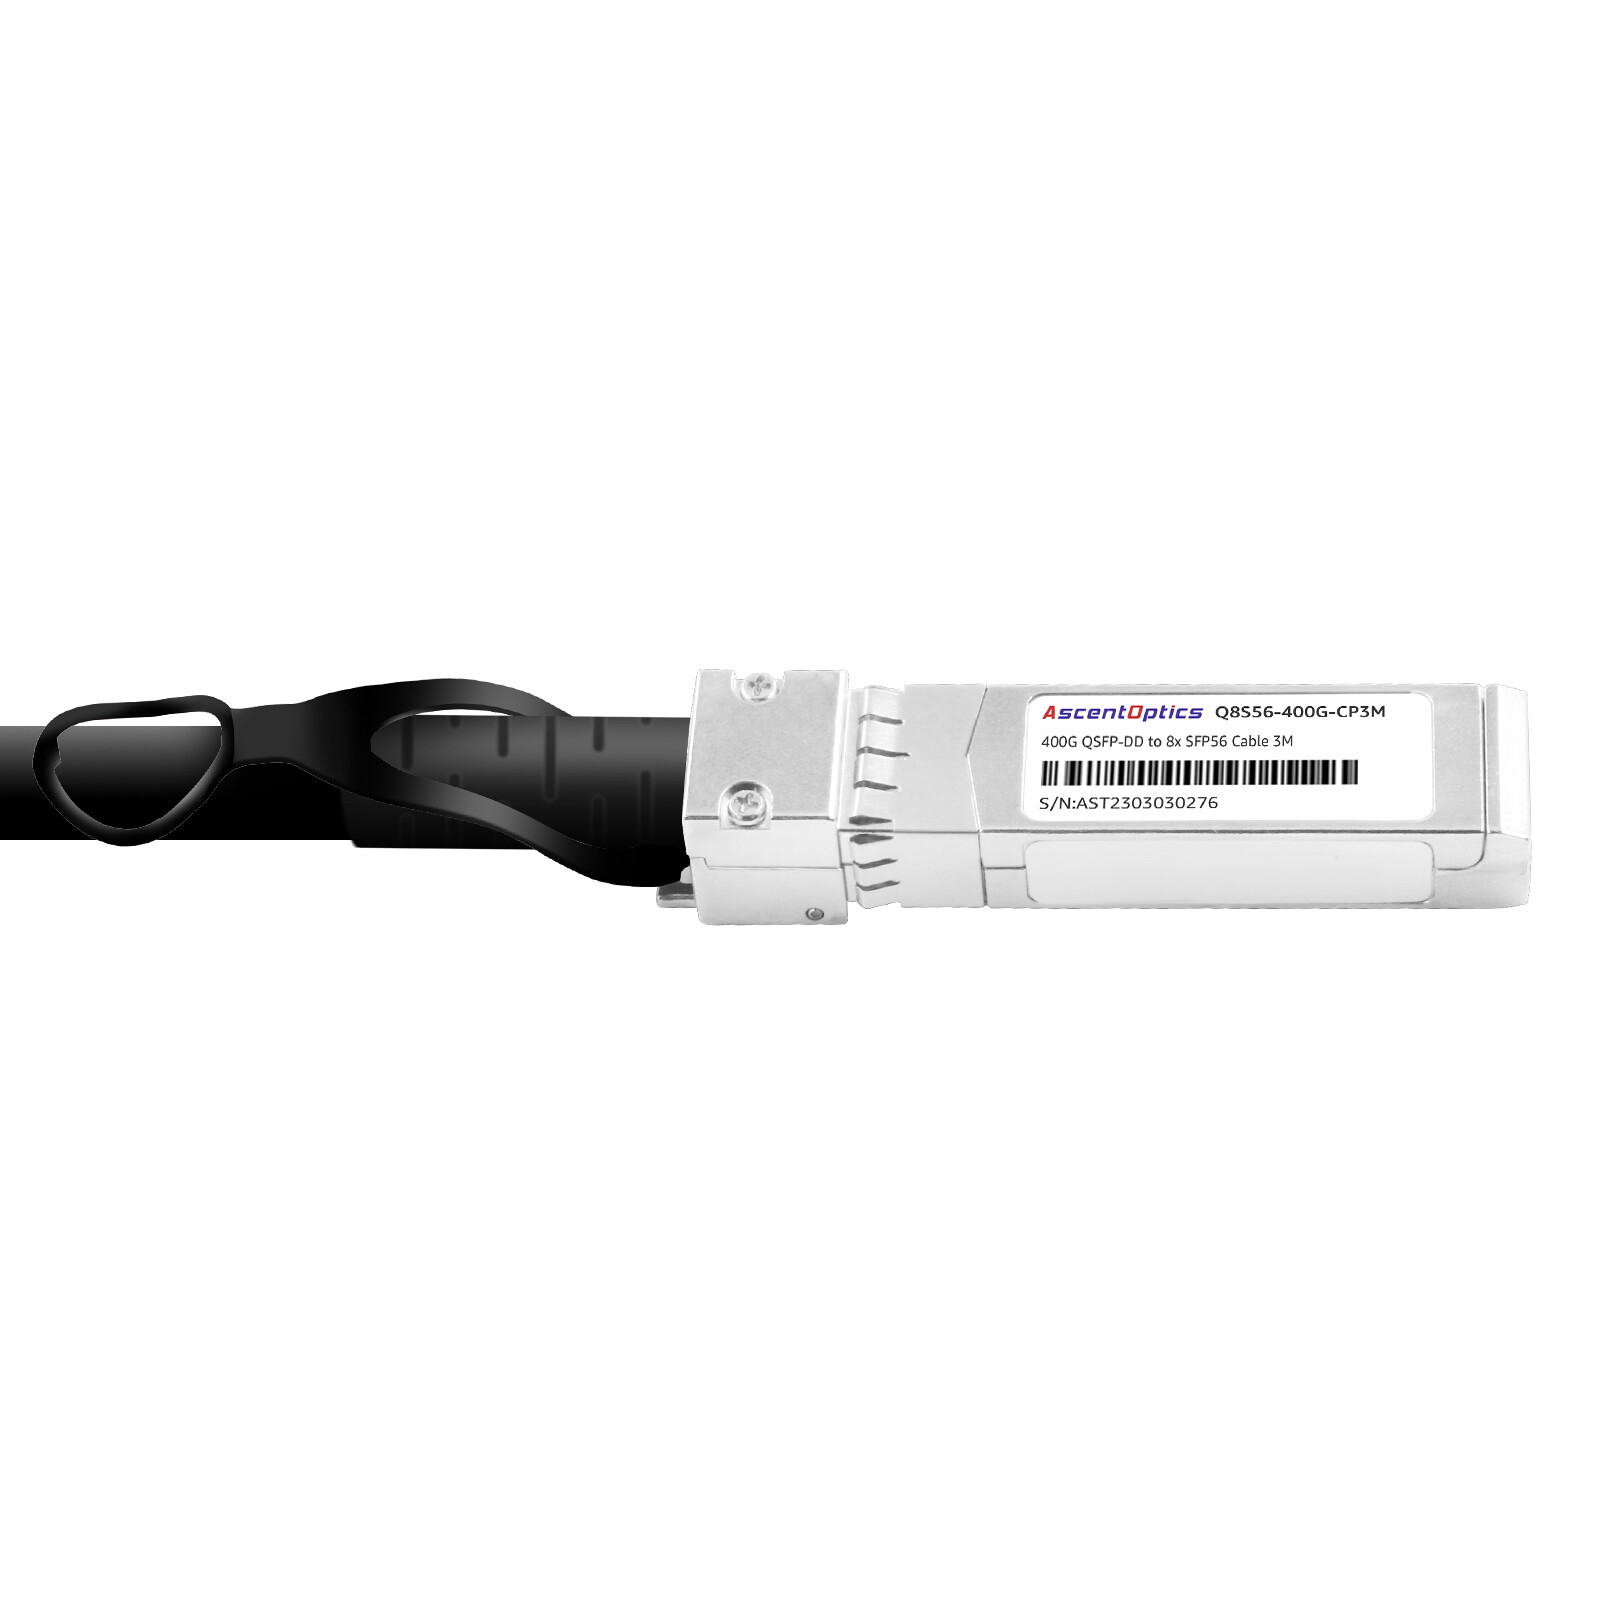 400G QSFP-DD to 8x 50G SFP56 Copper Breakout Cable,3 Meters,Passive